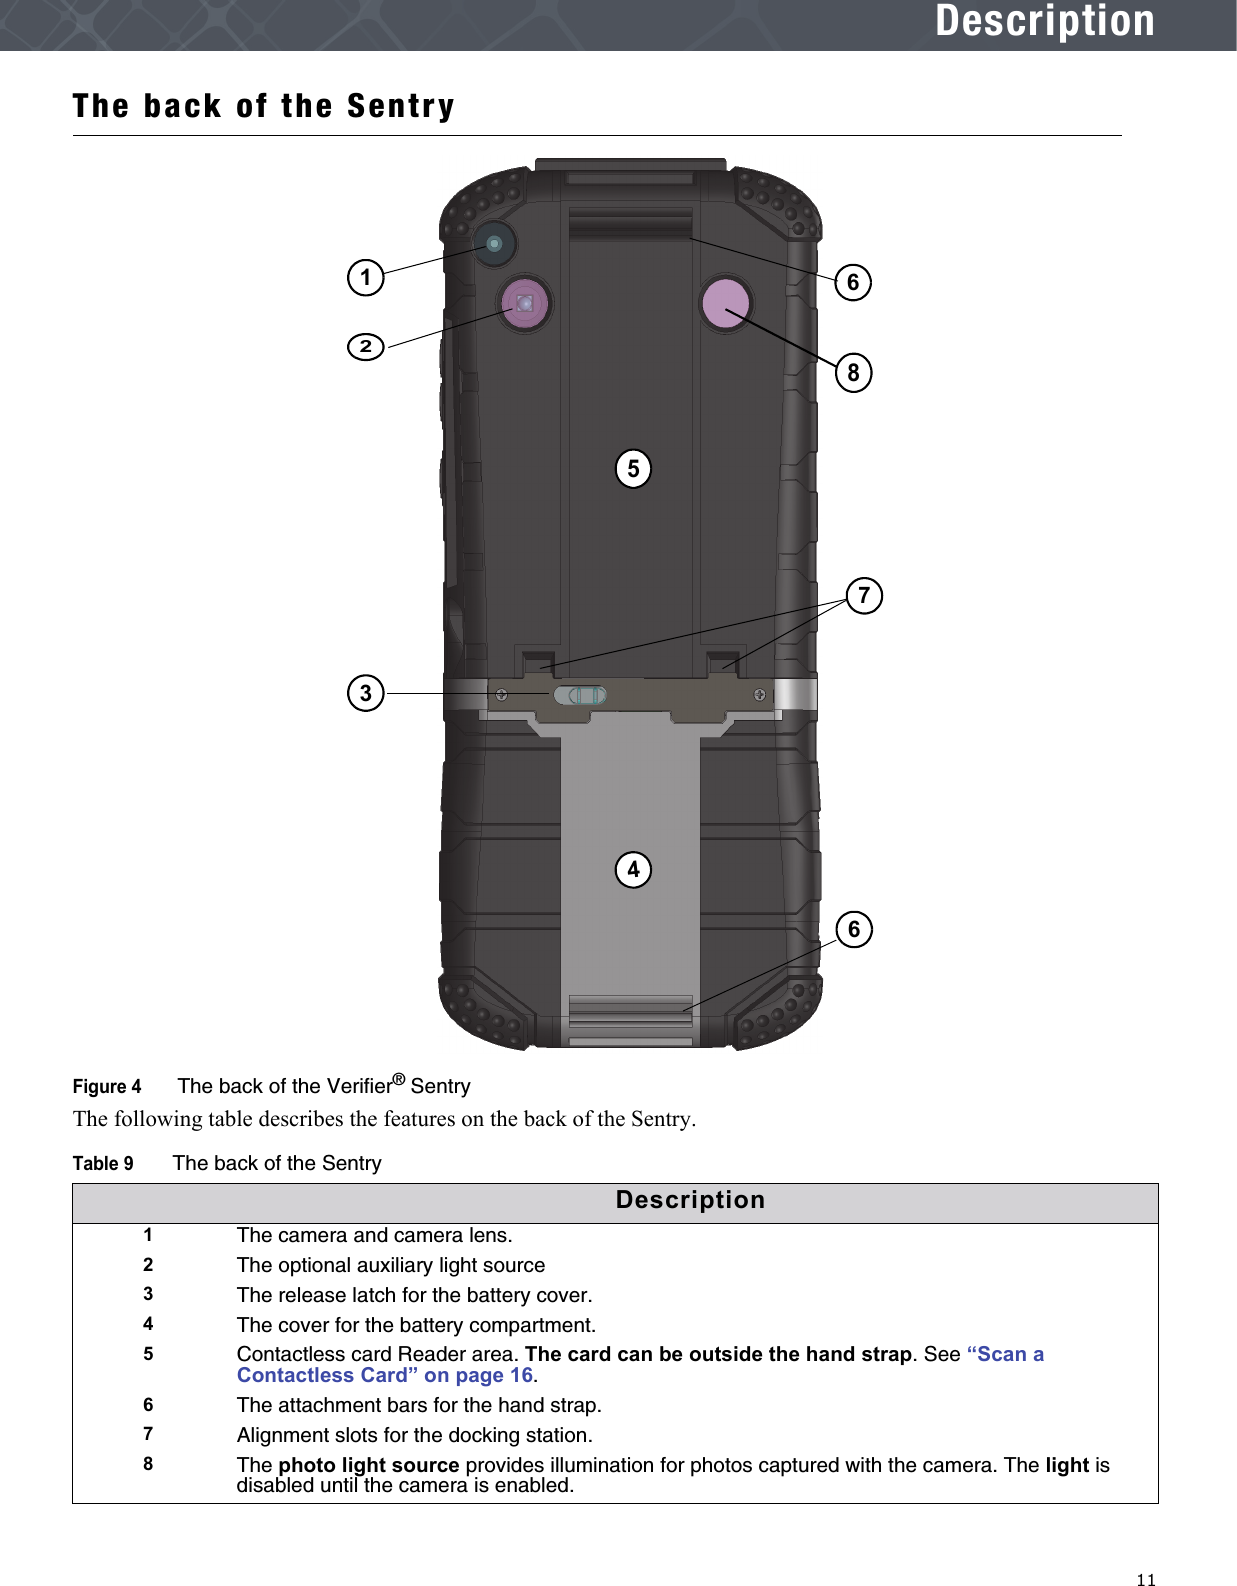   11DescriptionThe back of the SentryFigure 4  The back of the Verifier® SentryThe following table describes the features on the back of the Sentry.Table 9The back of the SentryDescription1The camera and camera lens. 2The optional auxiliary light source3The release latch for the battery cover.4The cover for the battery compartment.5Contactless card Reader area. The card can be outside the hand strap. See “Scan a Contactless Card” on page 16.6The attachment bars for the hand strap.7Alignment slots for the docking station.8The photo light source provides illumination for photos captured with the camera. The light is disabled until the camera is enabled.136247856